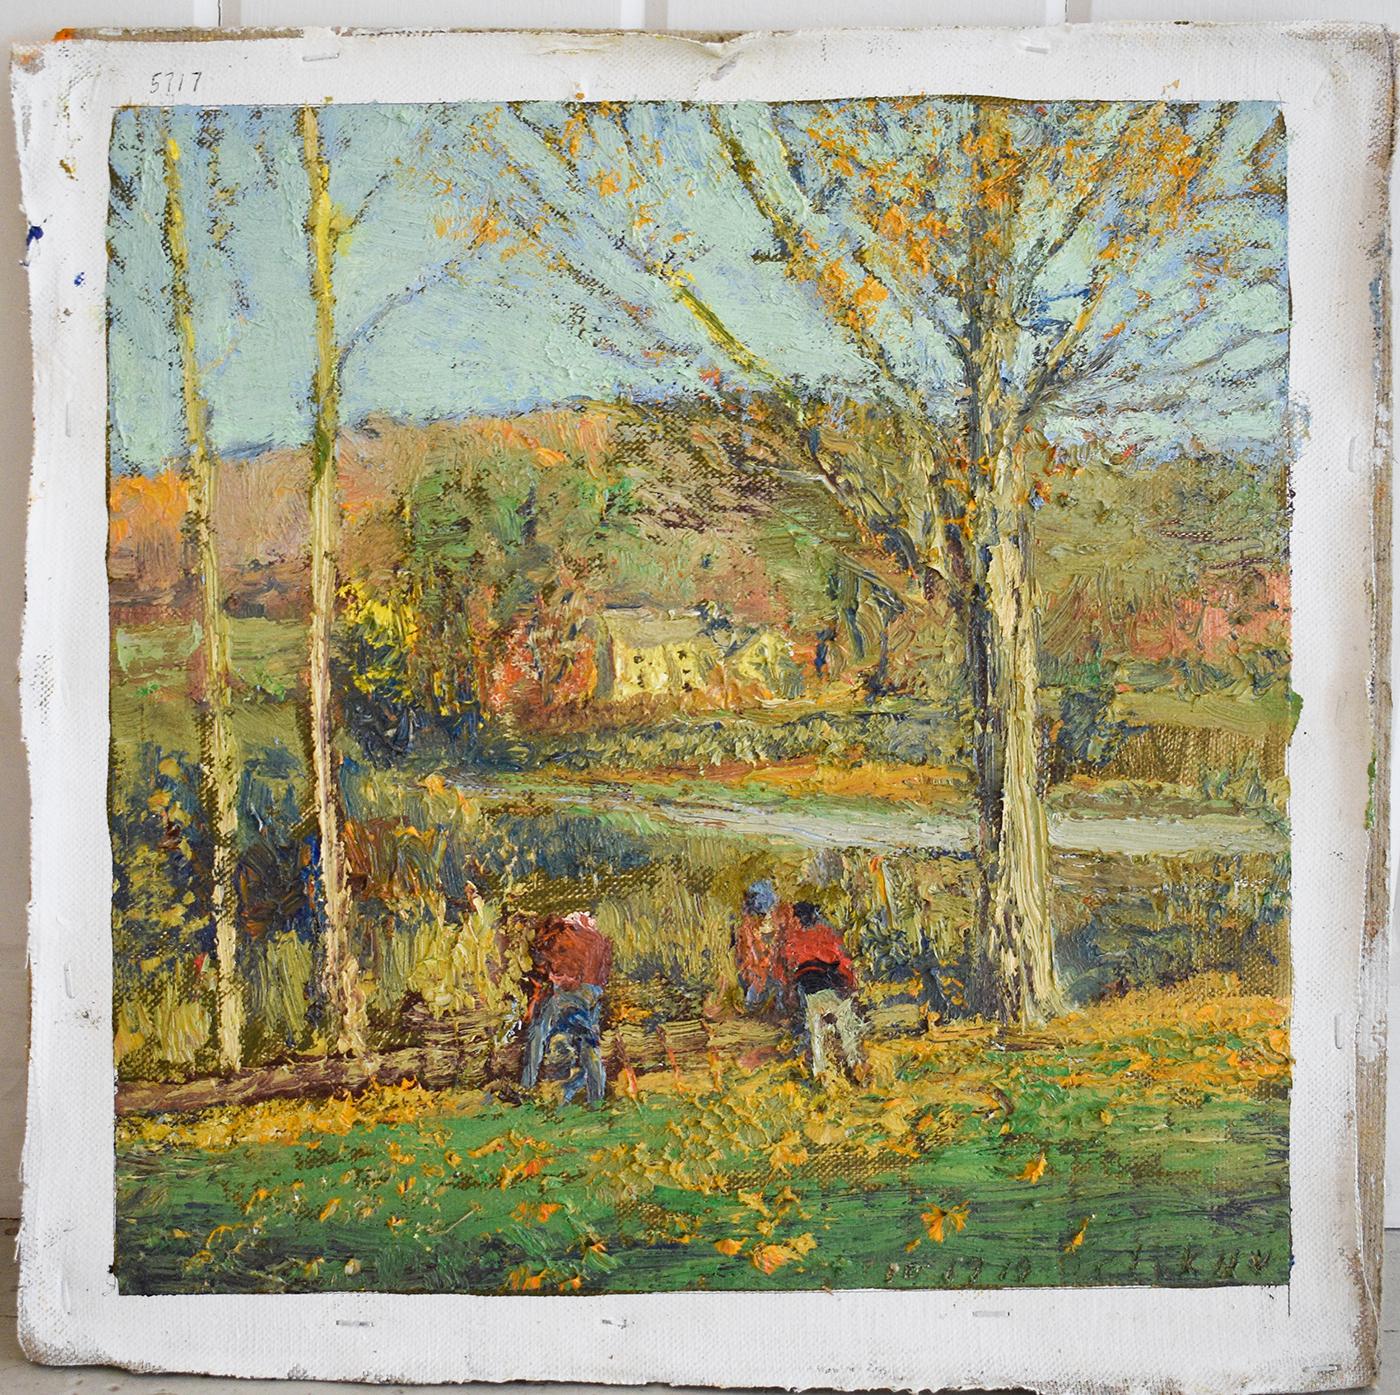 #5717 Wood Cutters: Impressionist En Plein Air Autumn Landscape Oil on Linen - Painting by Harry Orlyk